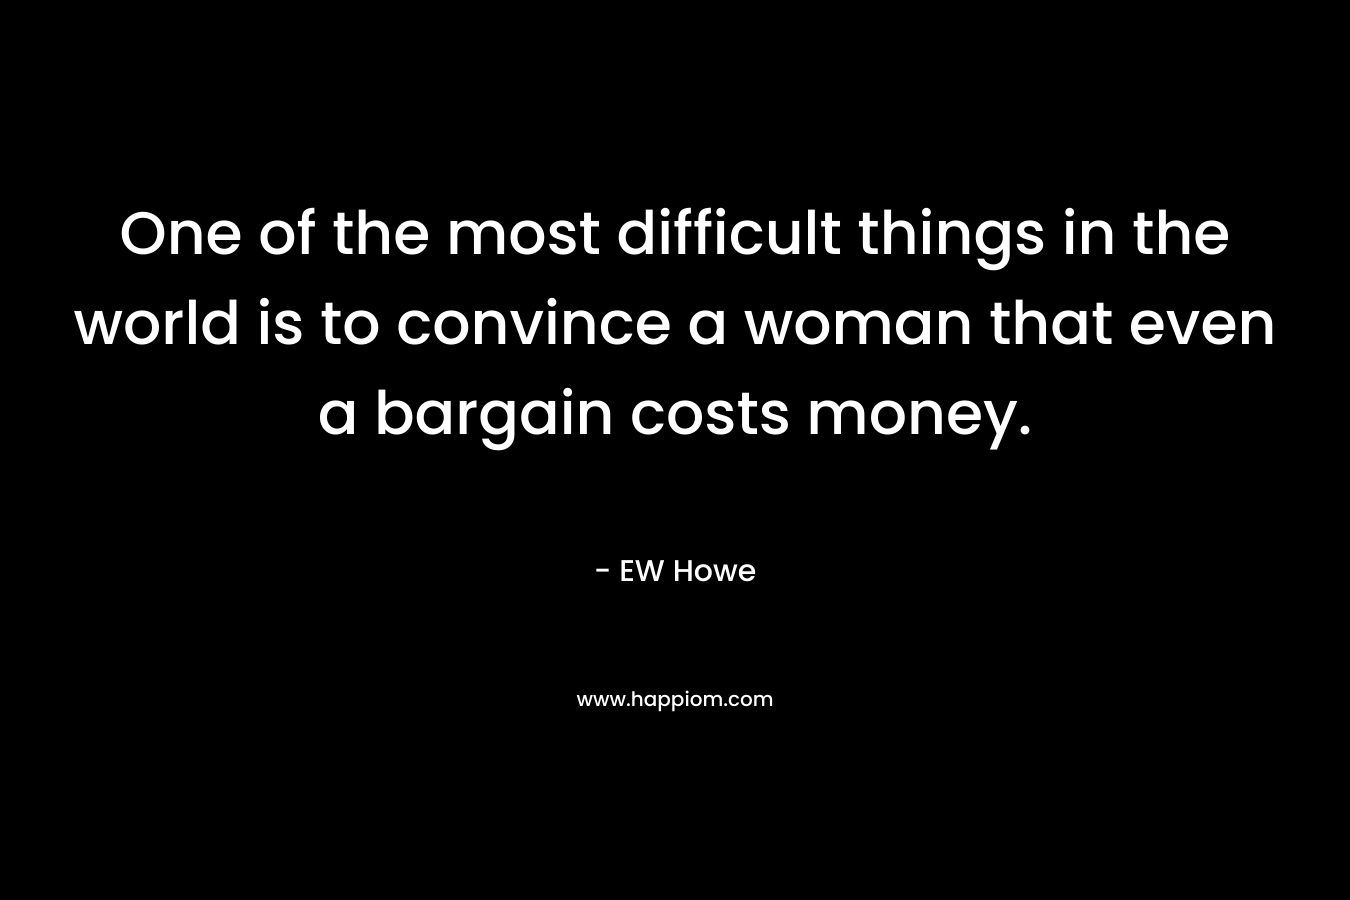 One of the most difficult things in the world is to convince a woman that even a bargain costs money. – EW Howe